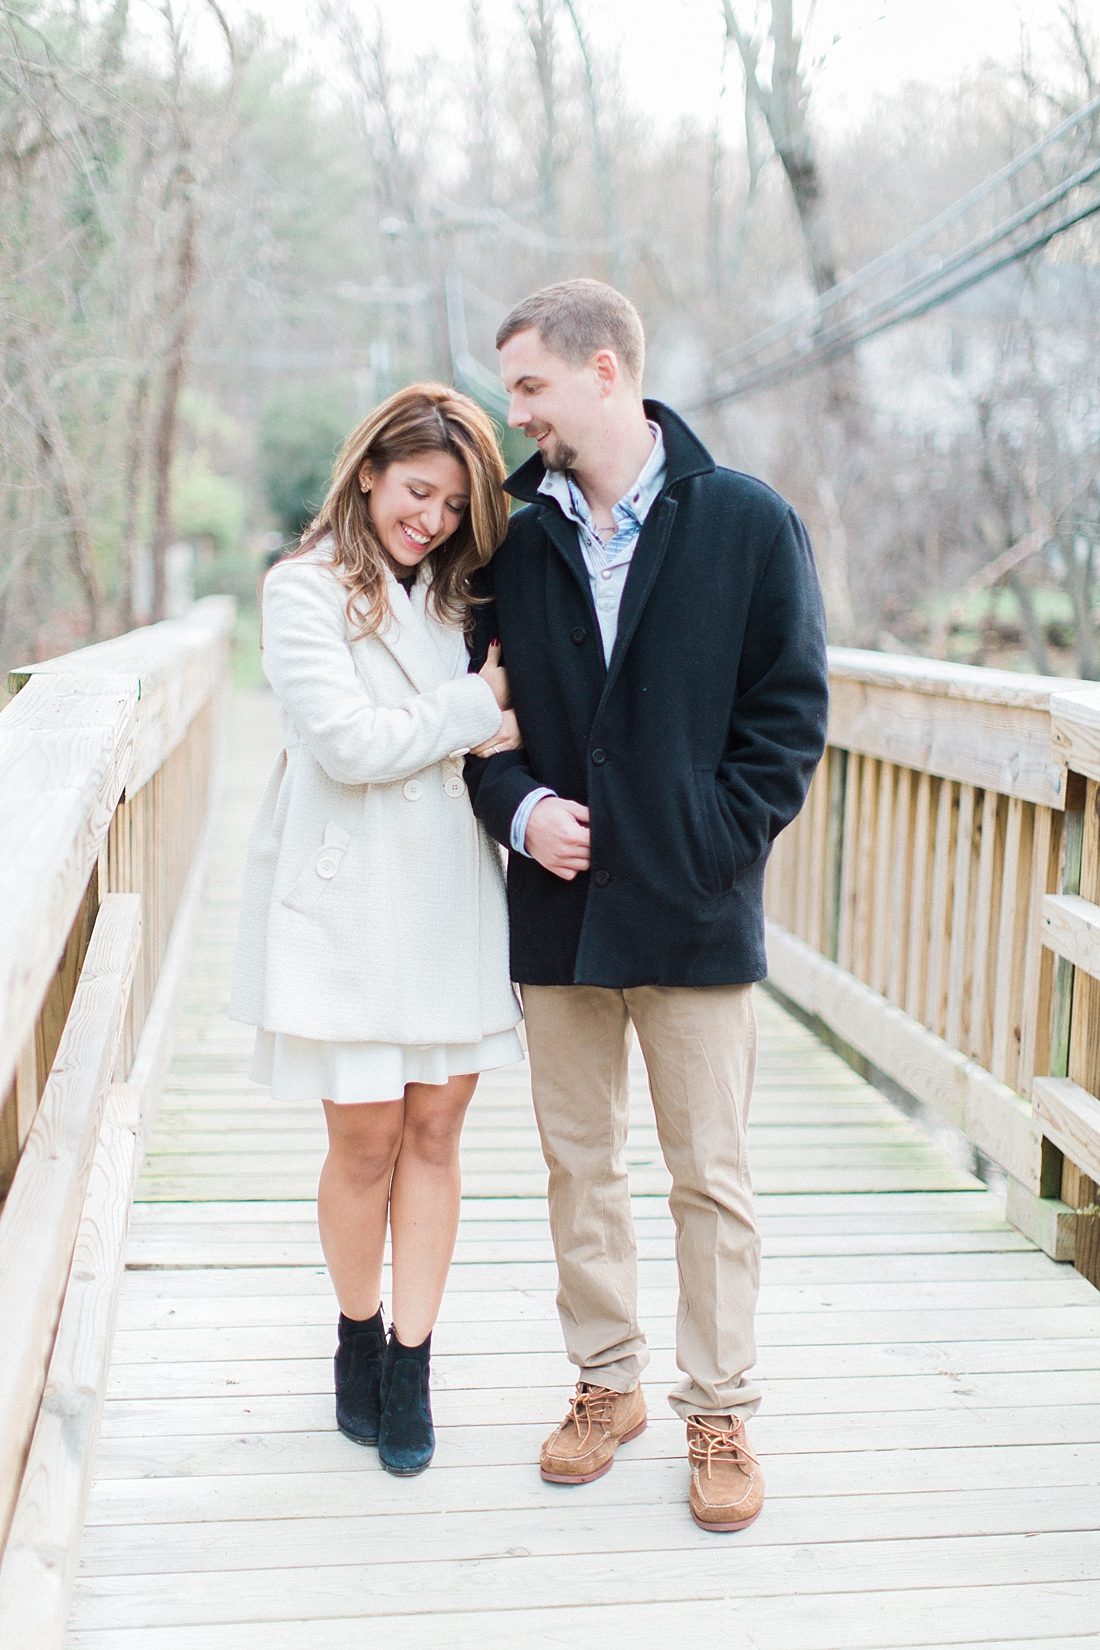 Falls Church, Virginia engagement session | Abby Grace